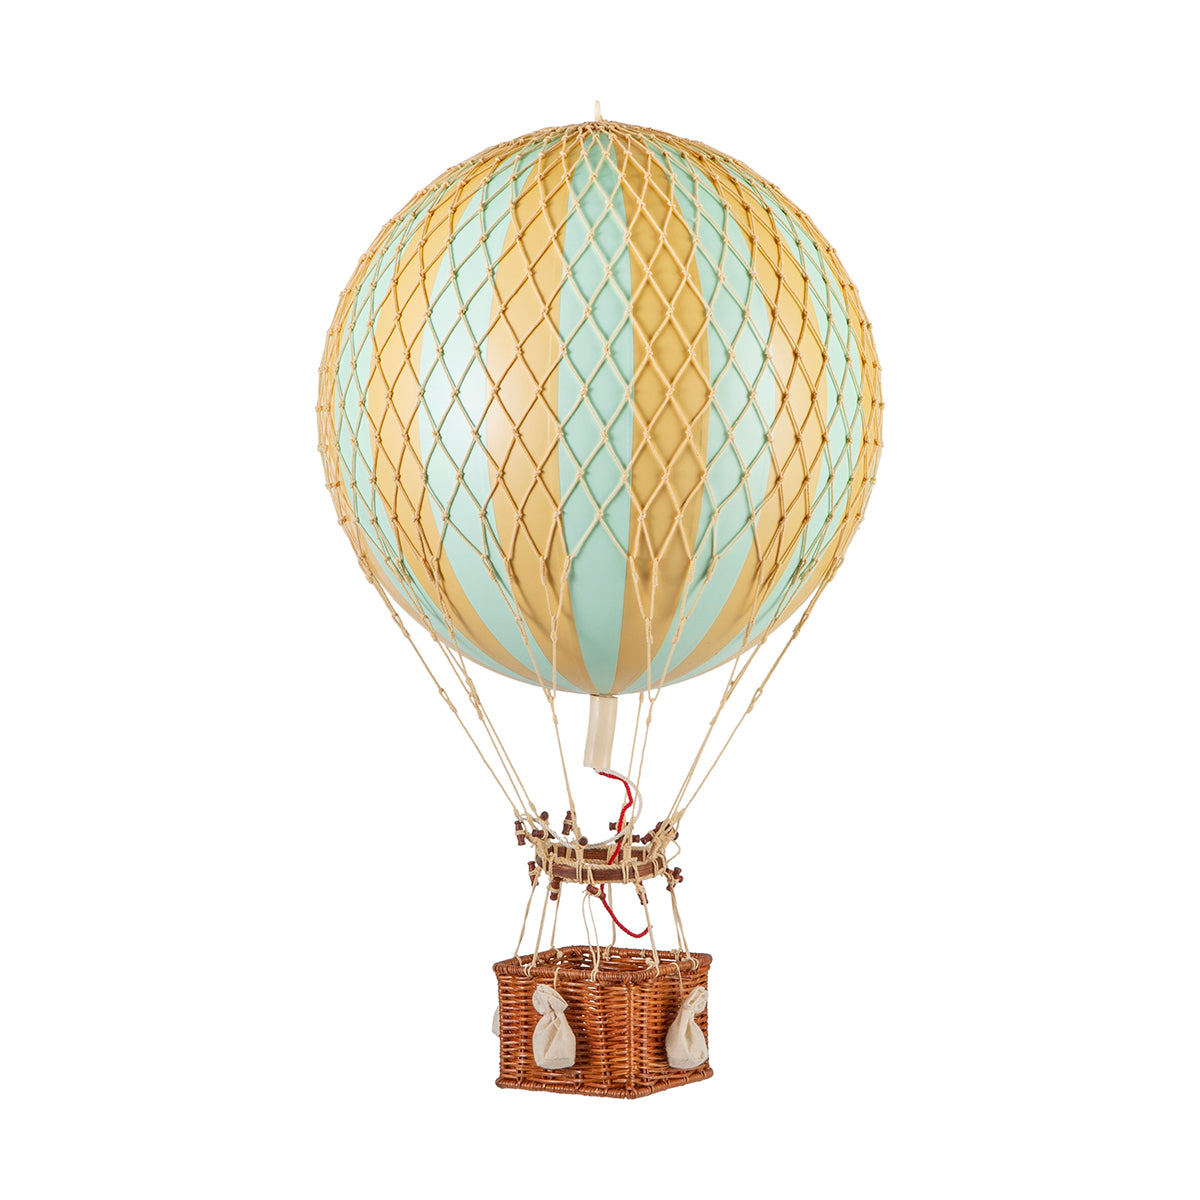 A unique perspective of a Wonderen Medium Hot Air Balloon - Royal Aero on a white background.